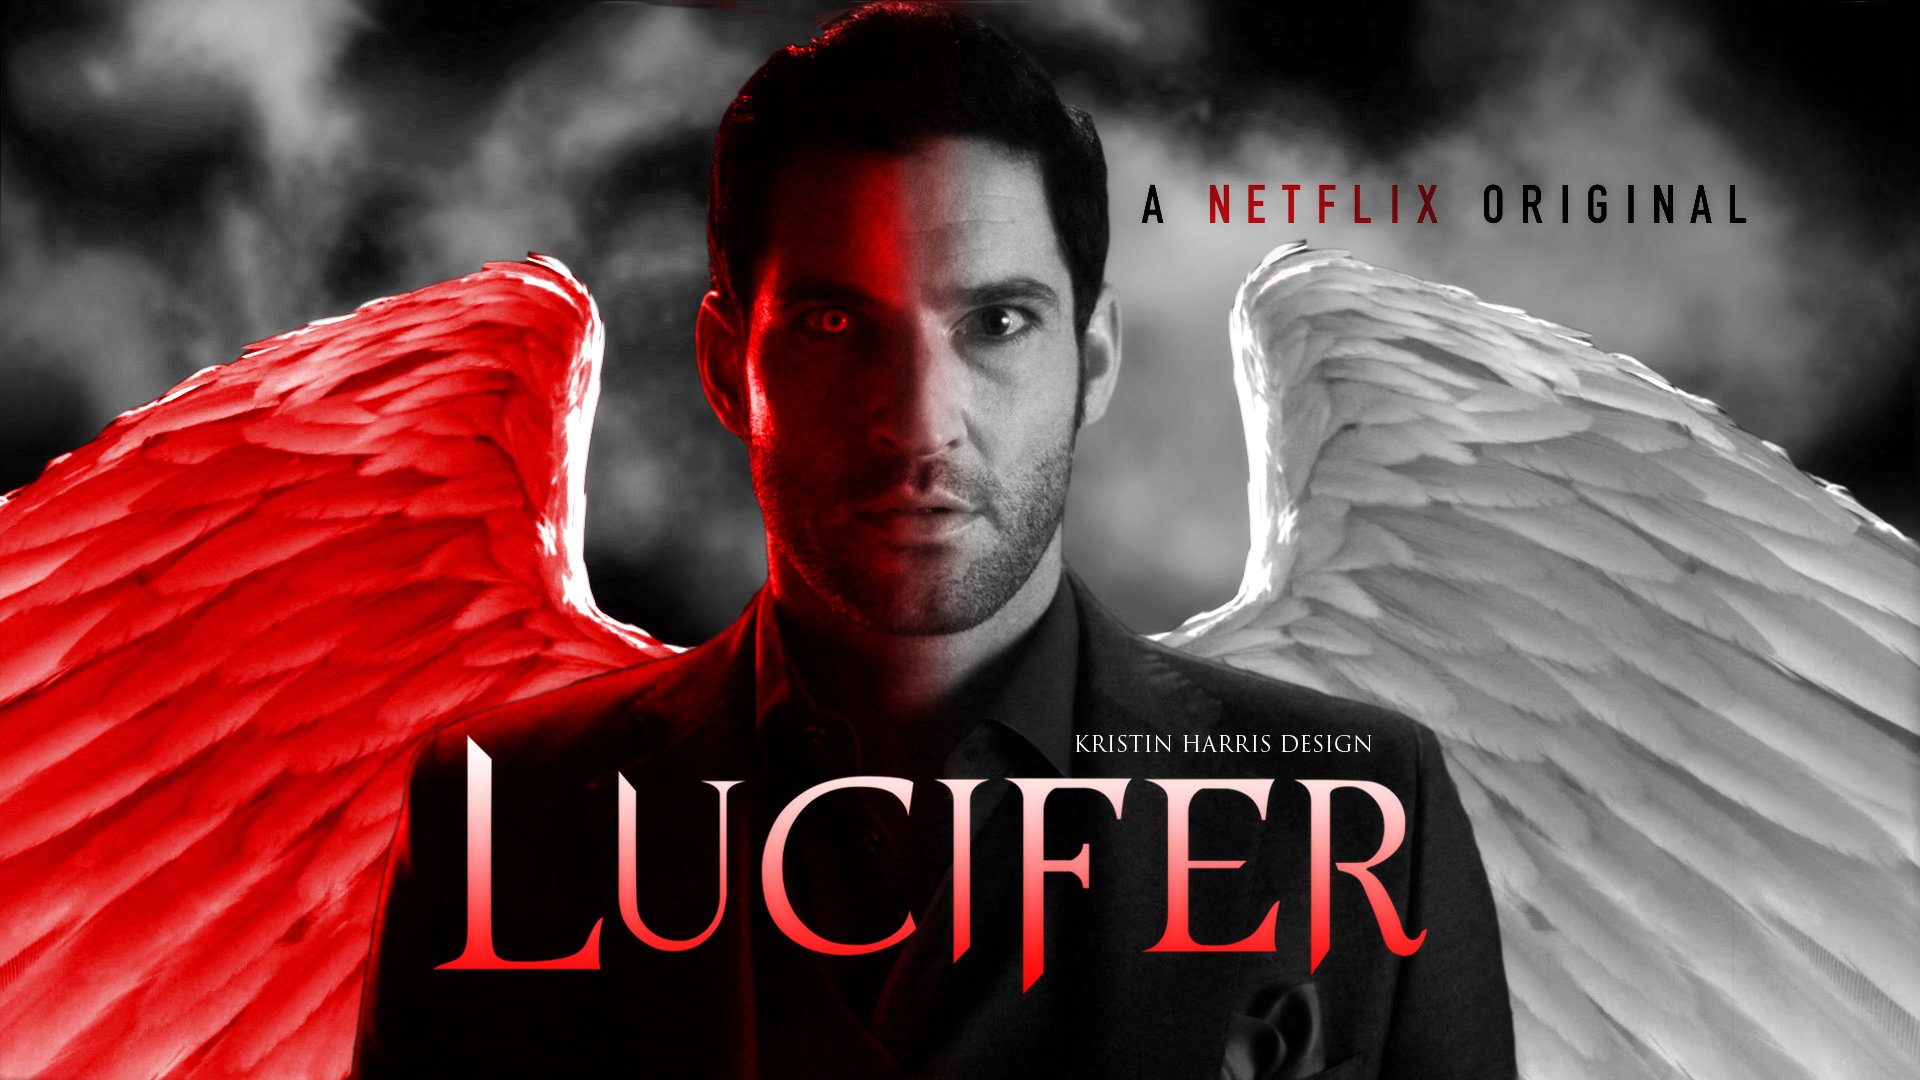 Lucifer Season 4 With Wings - 1920x1080 Wallpaper 